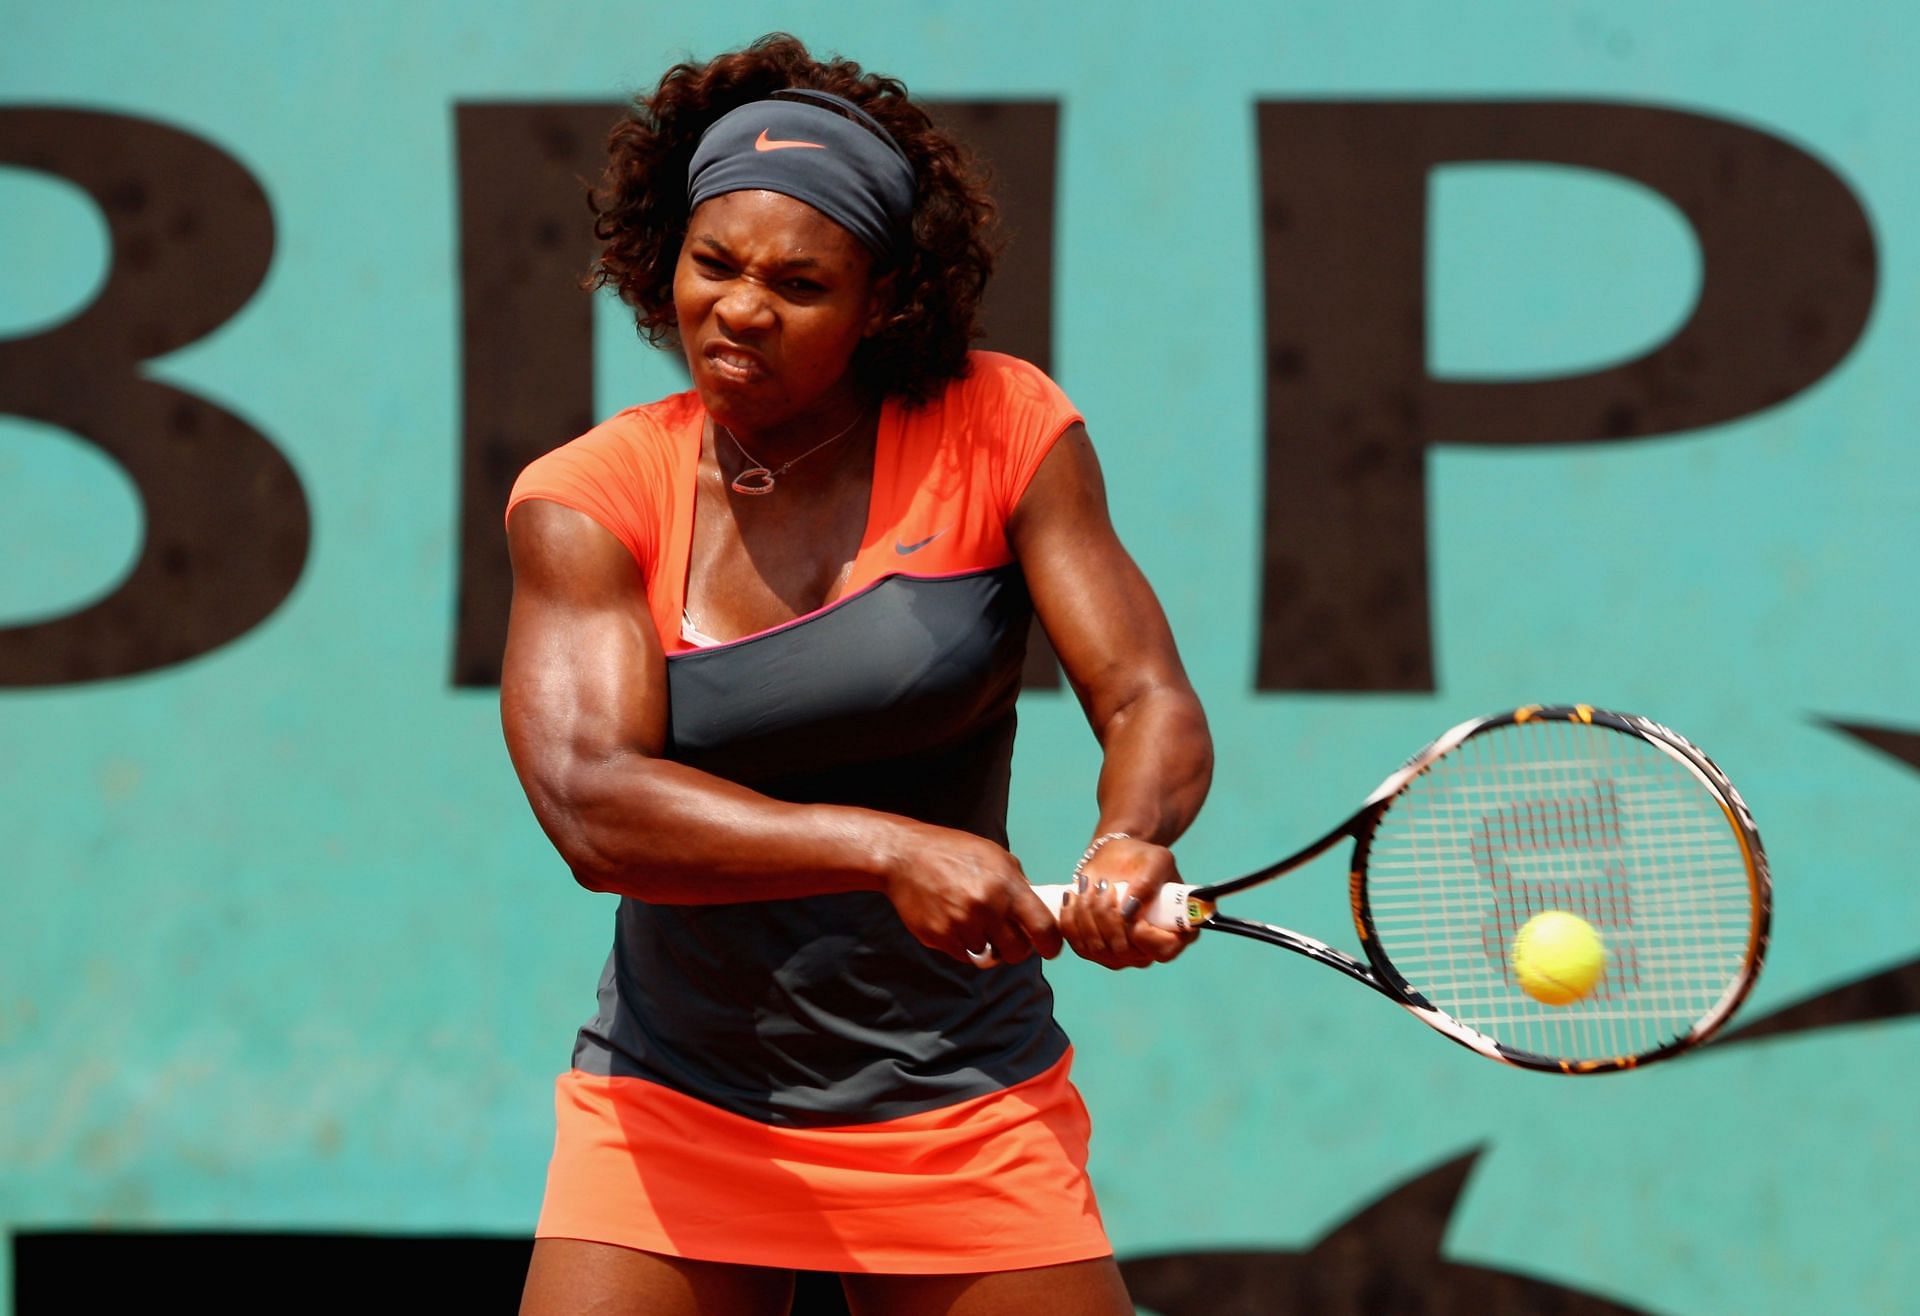 Serena Williams at the 2009 French Open